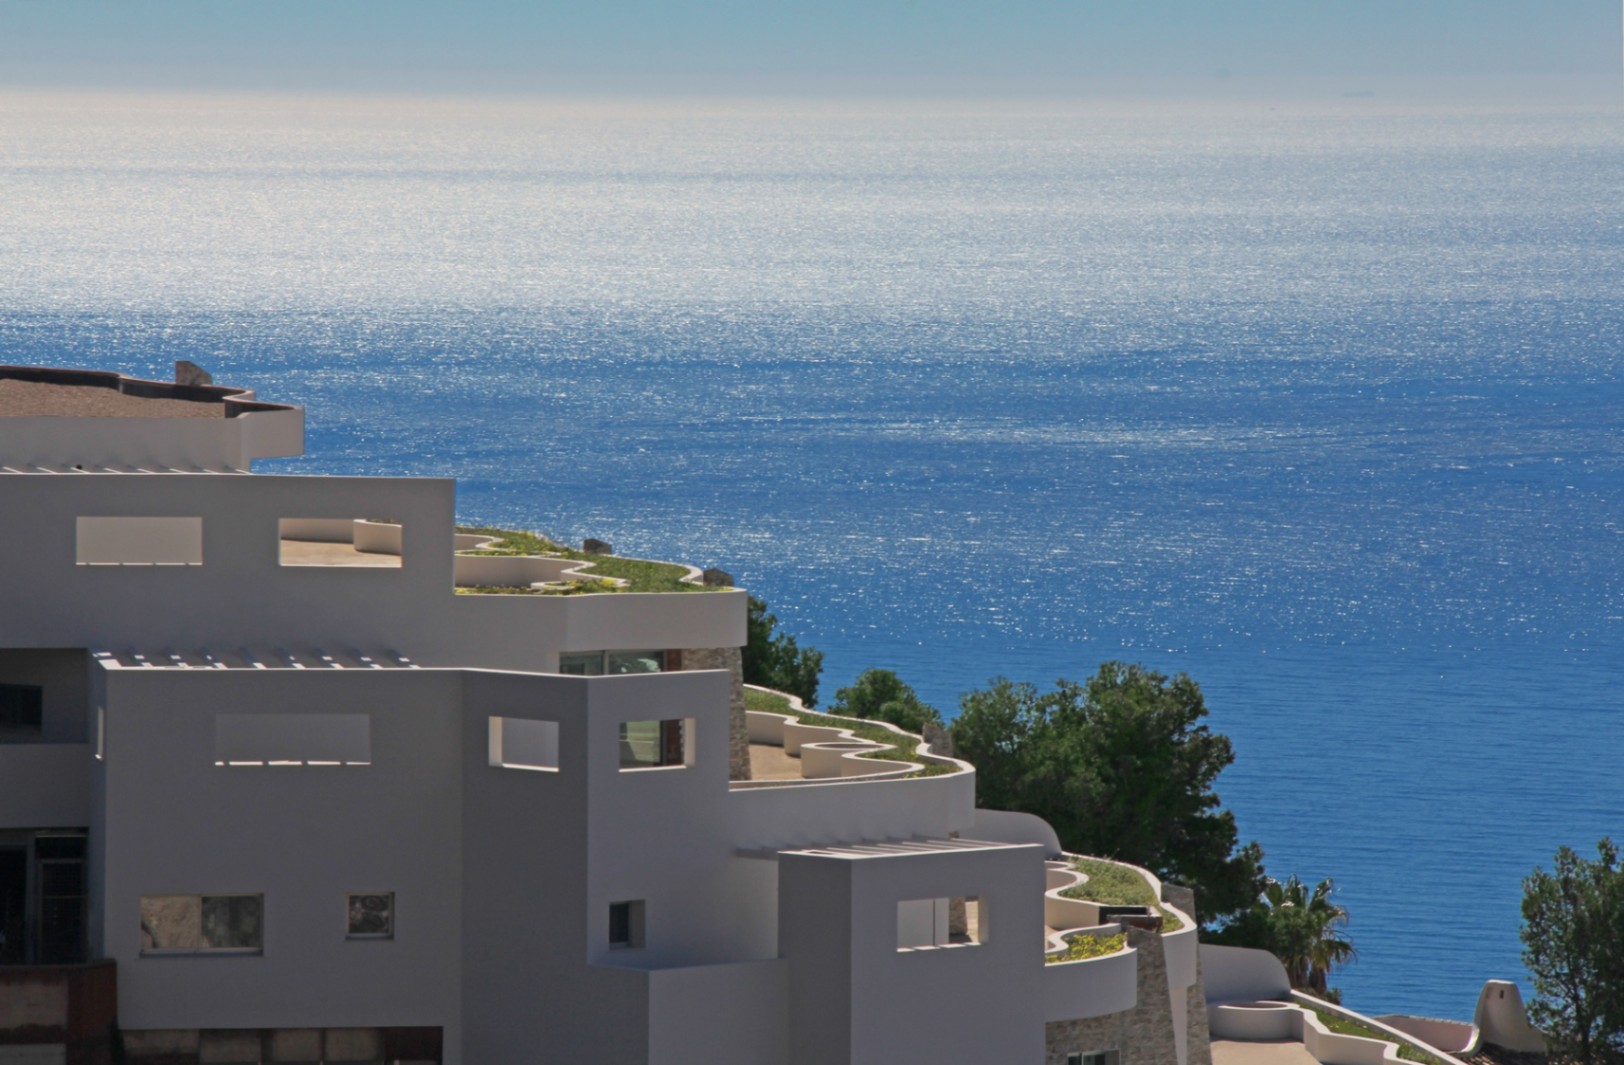 Apartment with sea views for sale in Altea, Costa Blanca